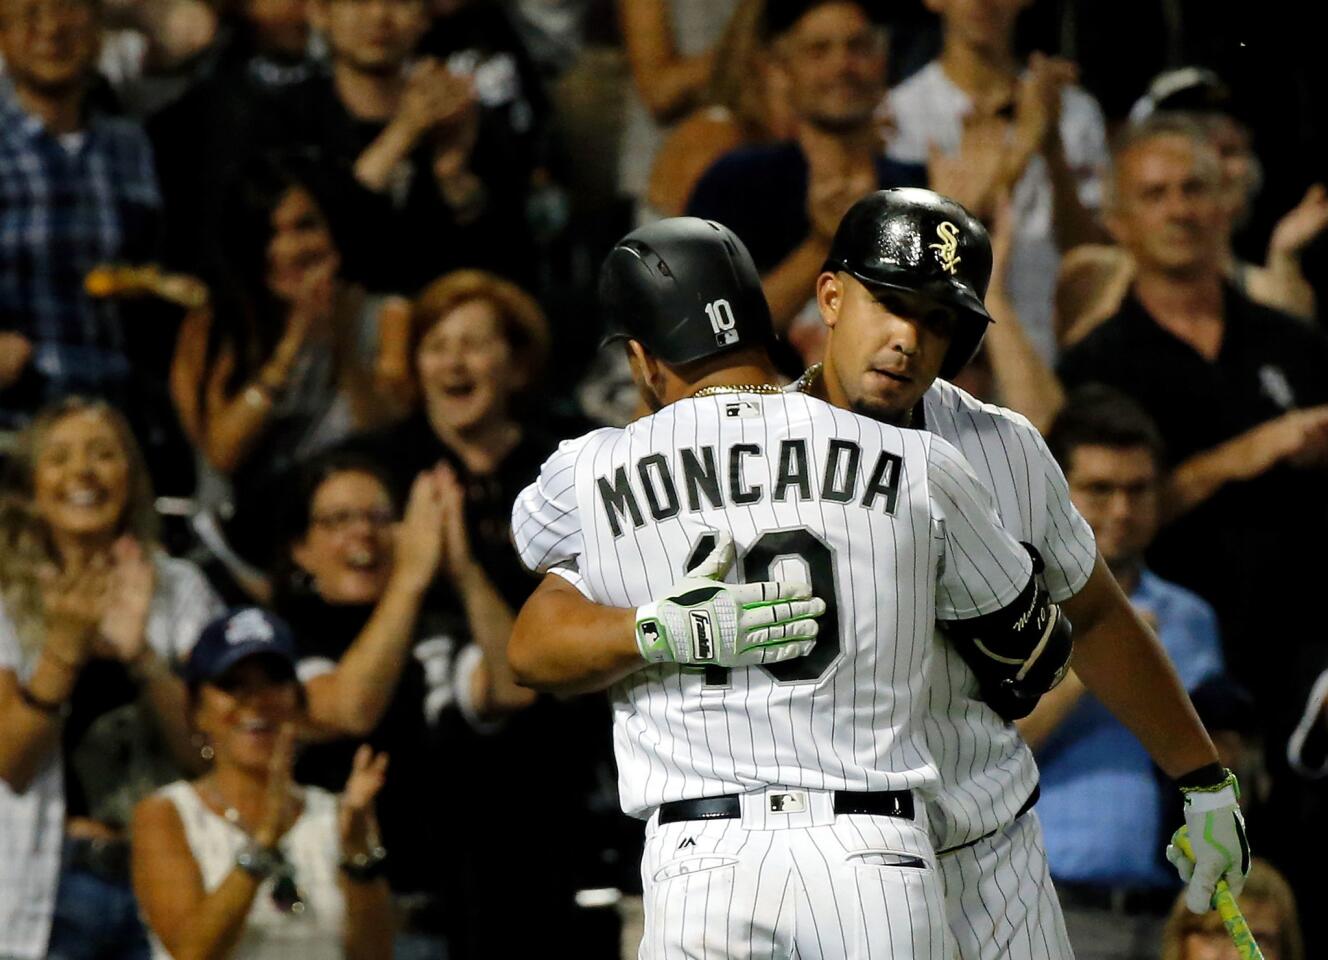 Yoan Moncada is hugged by Jose Abreu after hitting a home run against the Astros to tie the game during the ninth inning on Aug. 10, 2017.